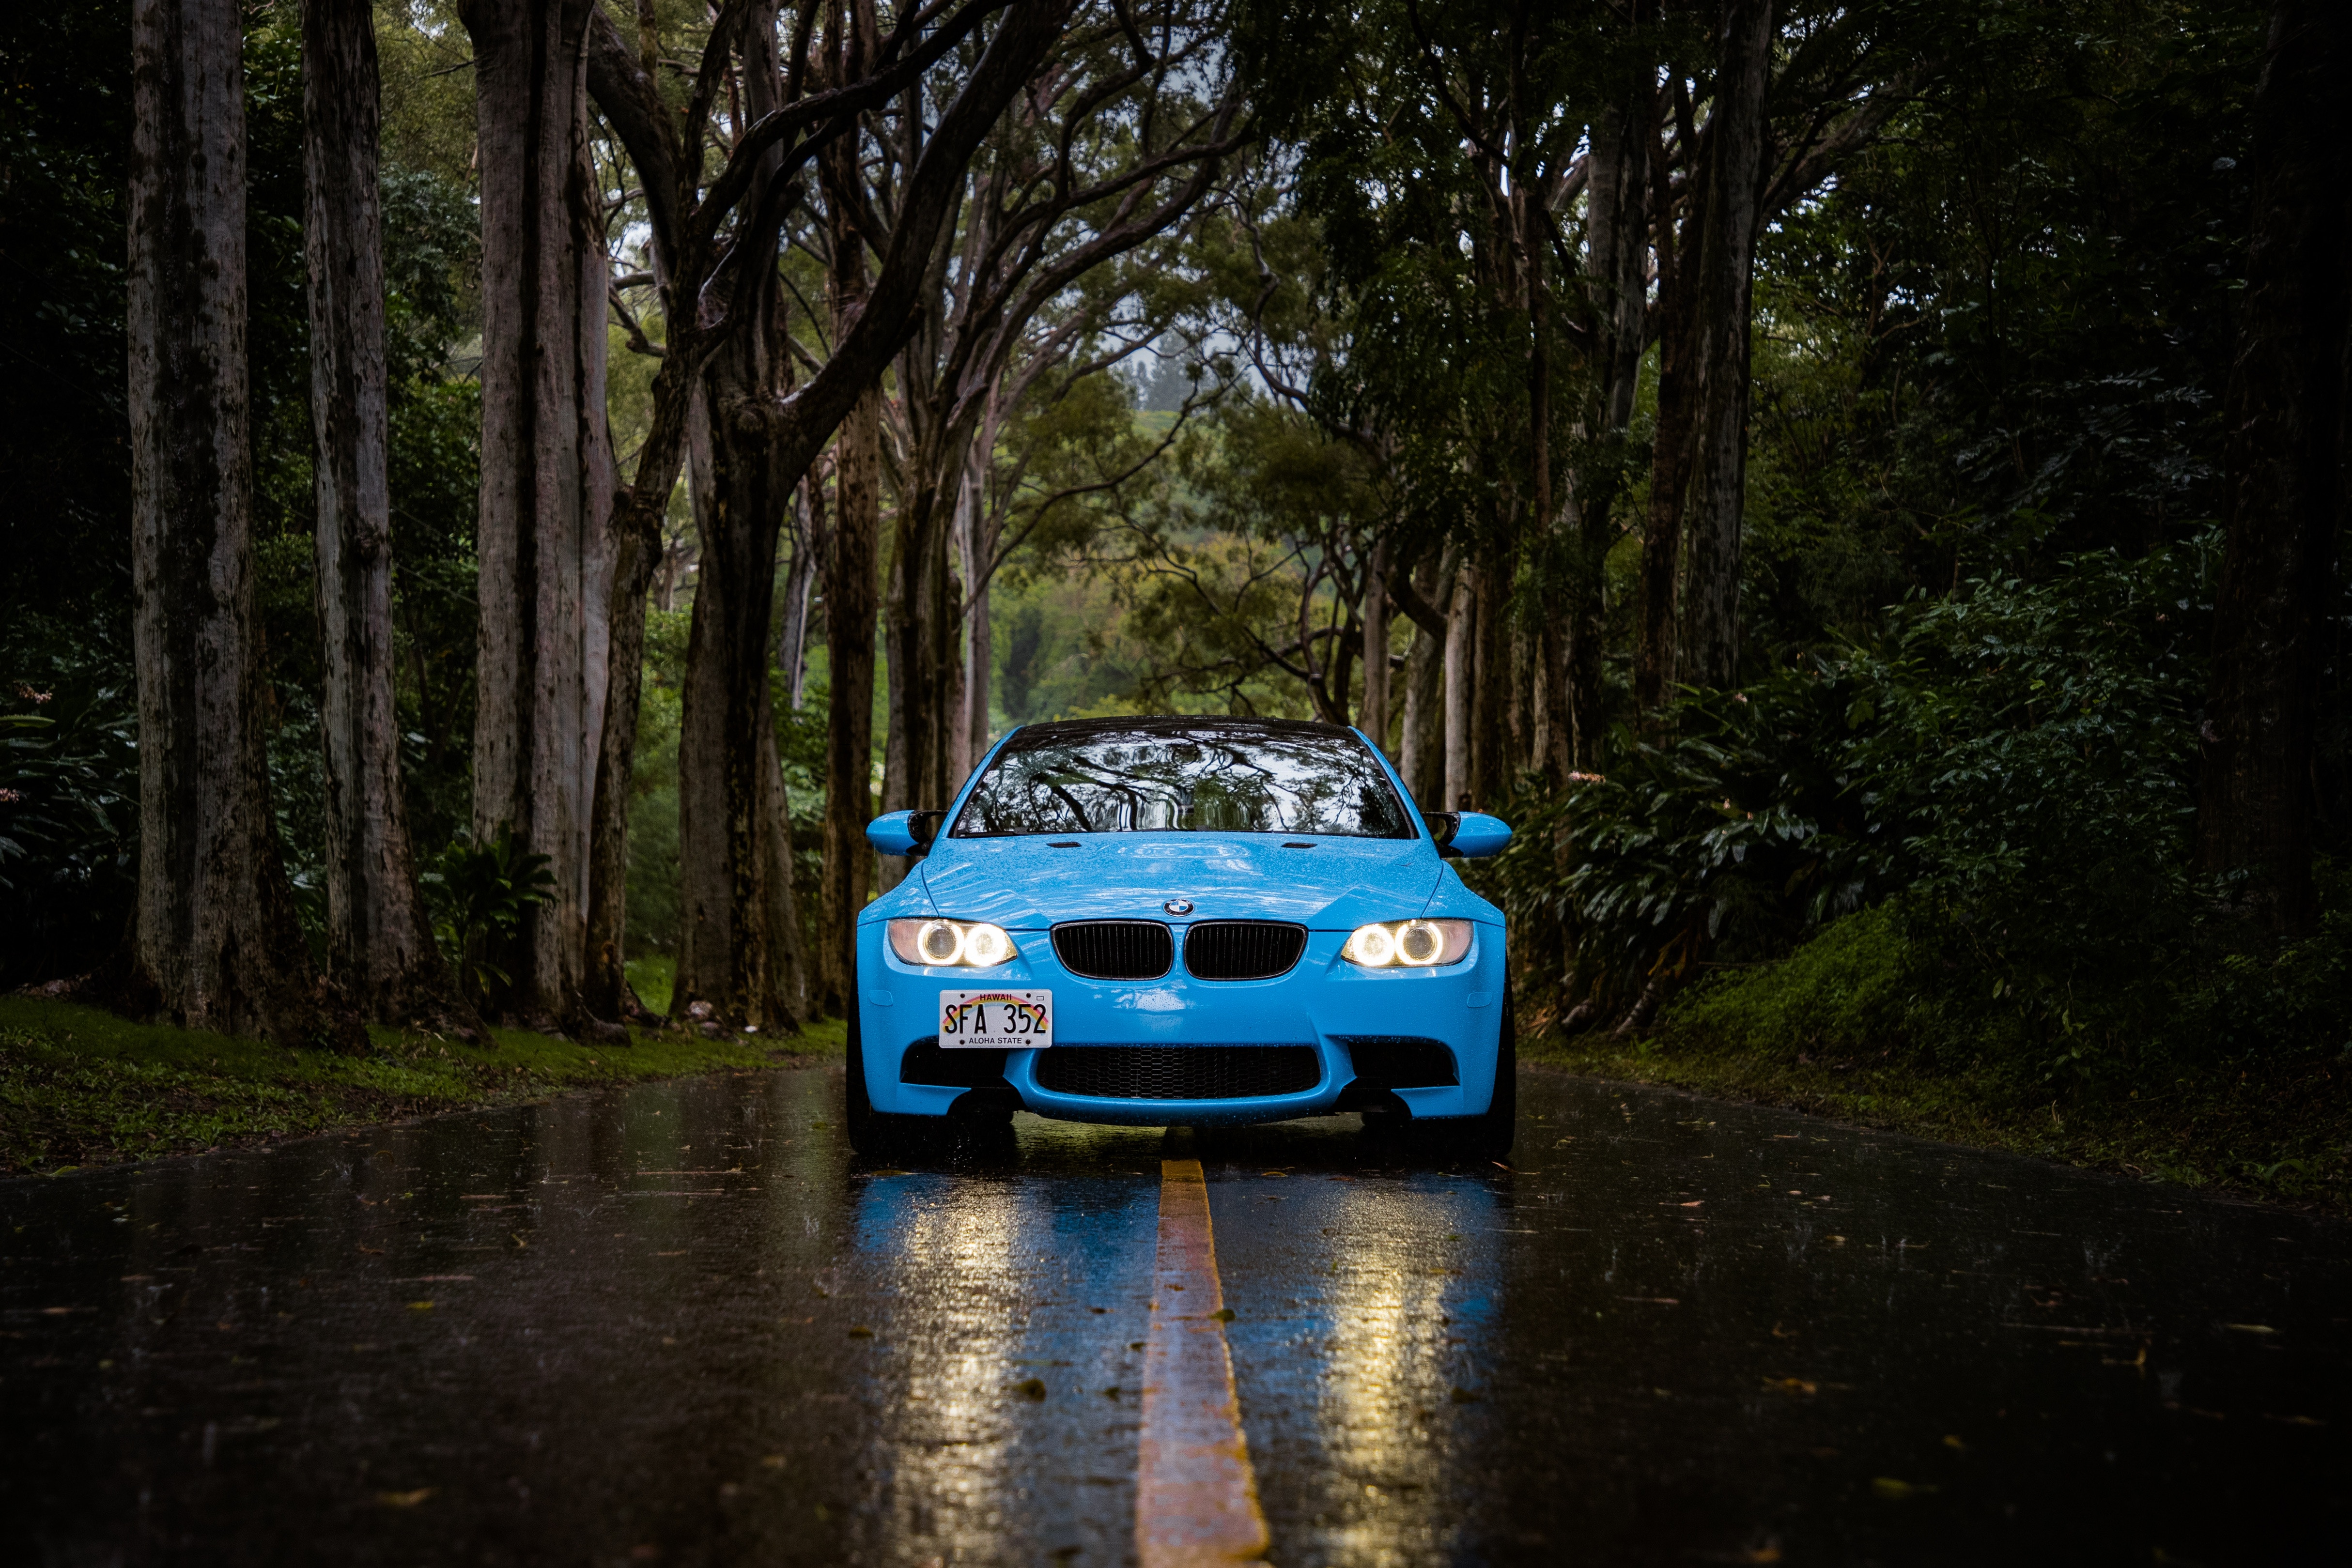 cars, bmw, rain, blue, road, forest, car, front view, bmw 5